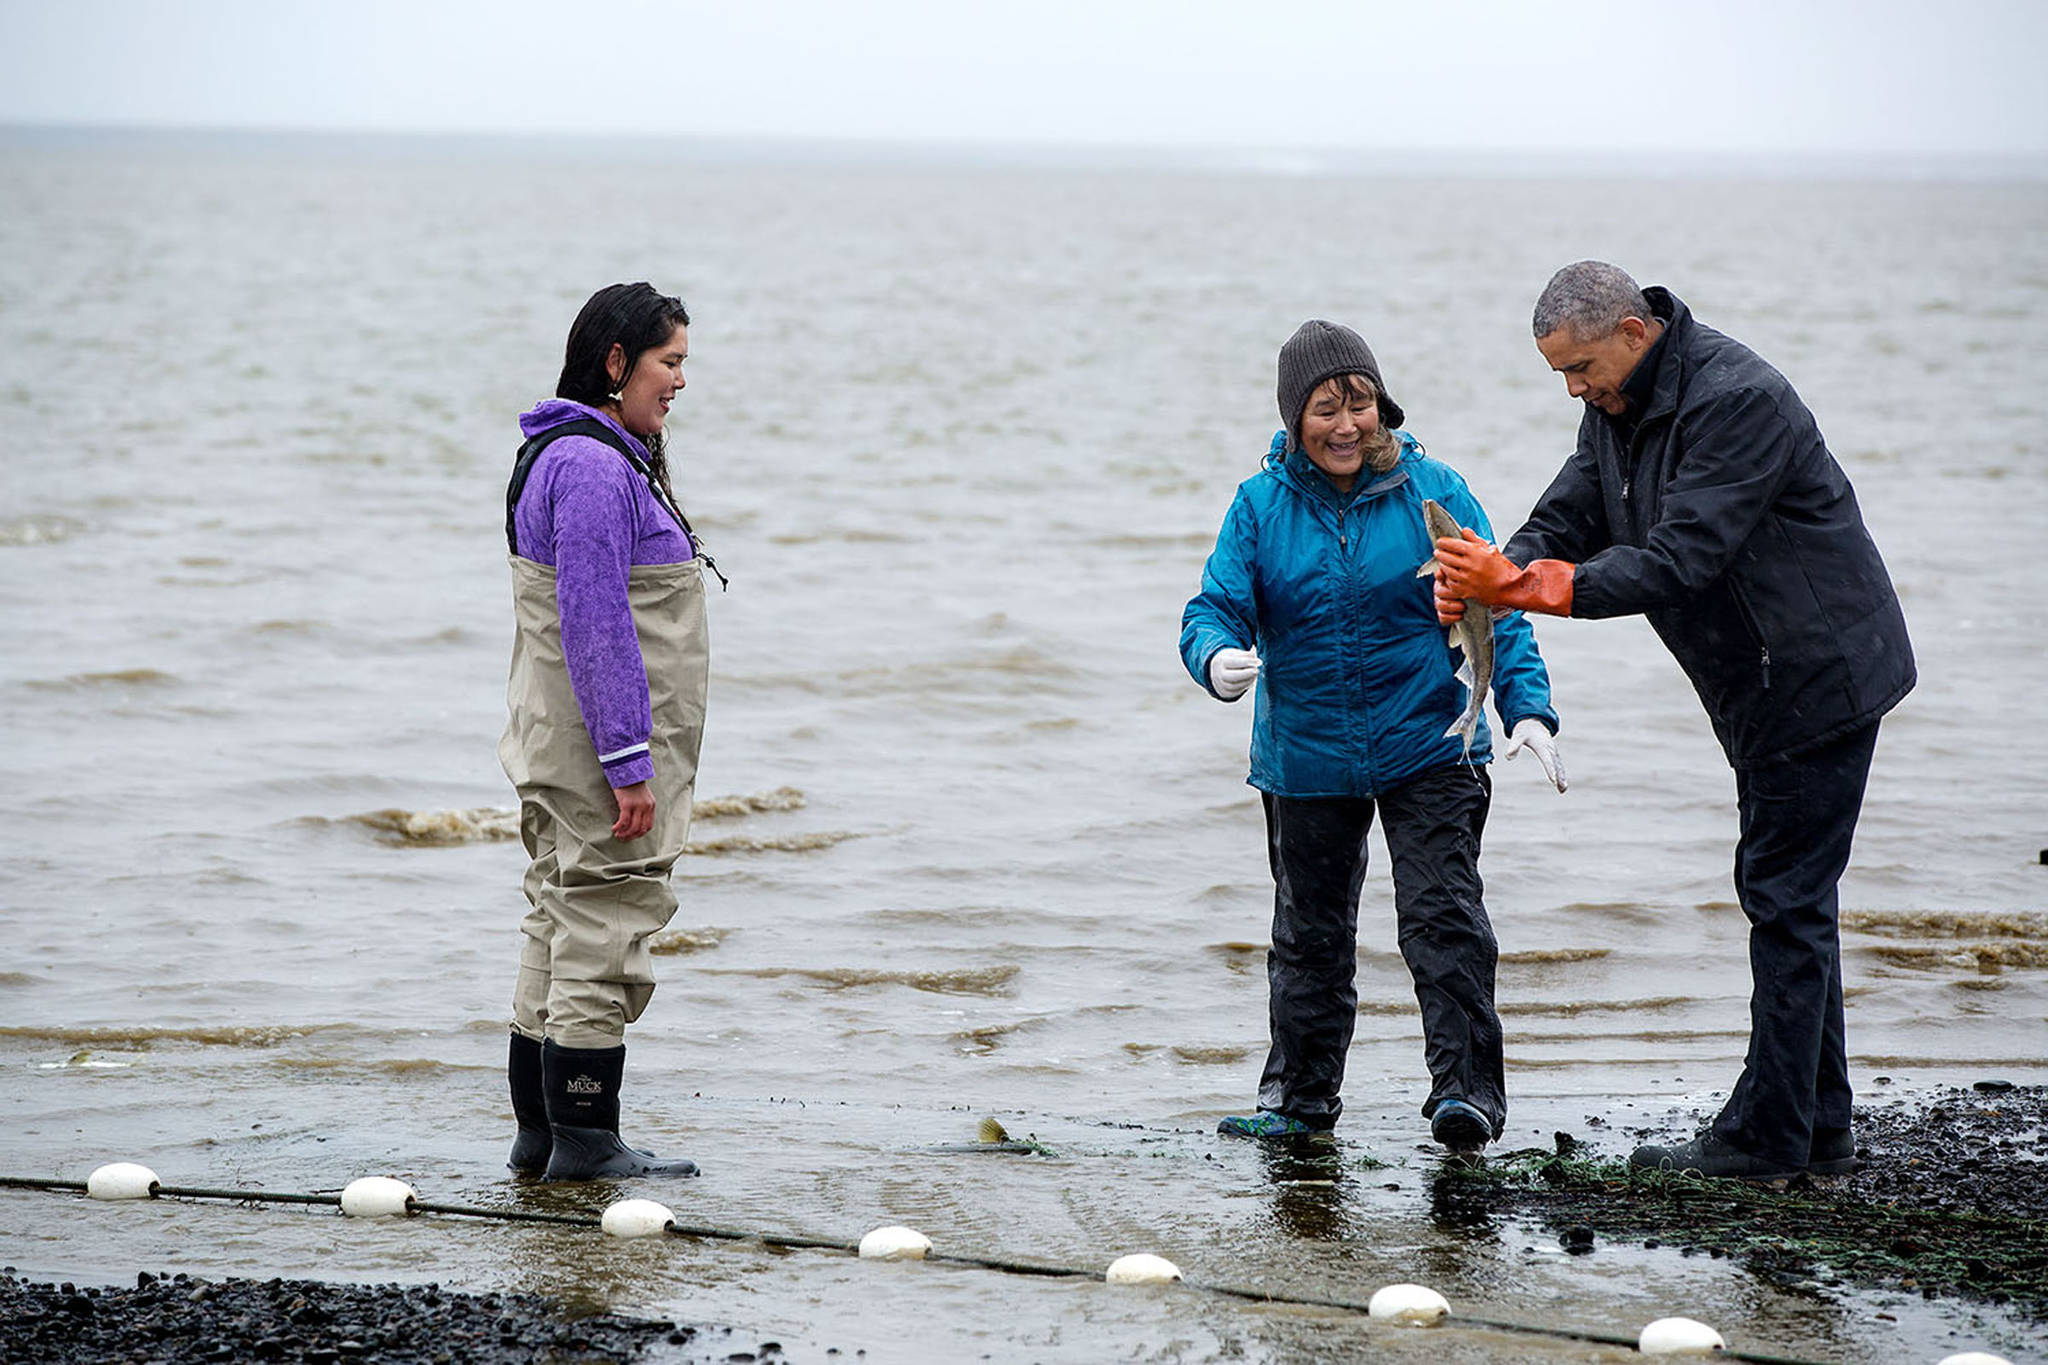 In this September 2, 2015 photo, former President Barack Obama with two Alaskans and a soon-to-be-viral spawning salmon on Kanakanak Beach in Dillingham, Alaska. (Courtesy Photo | The White House)